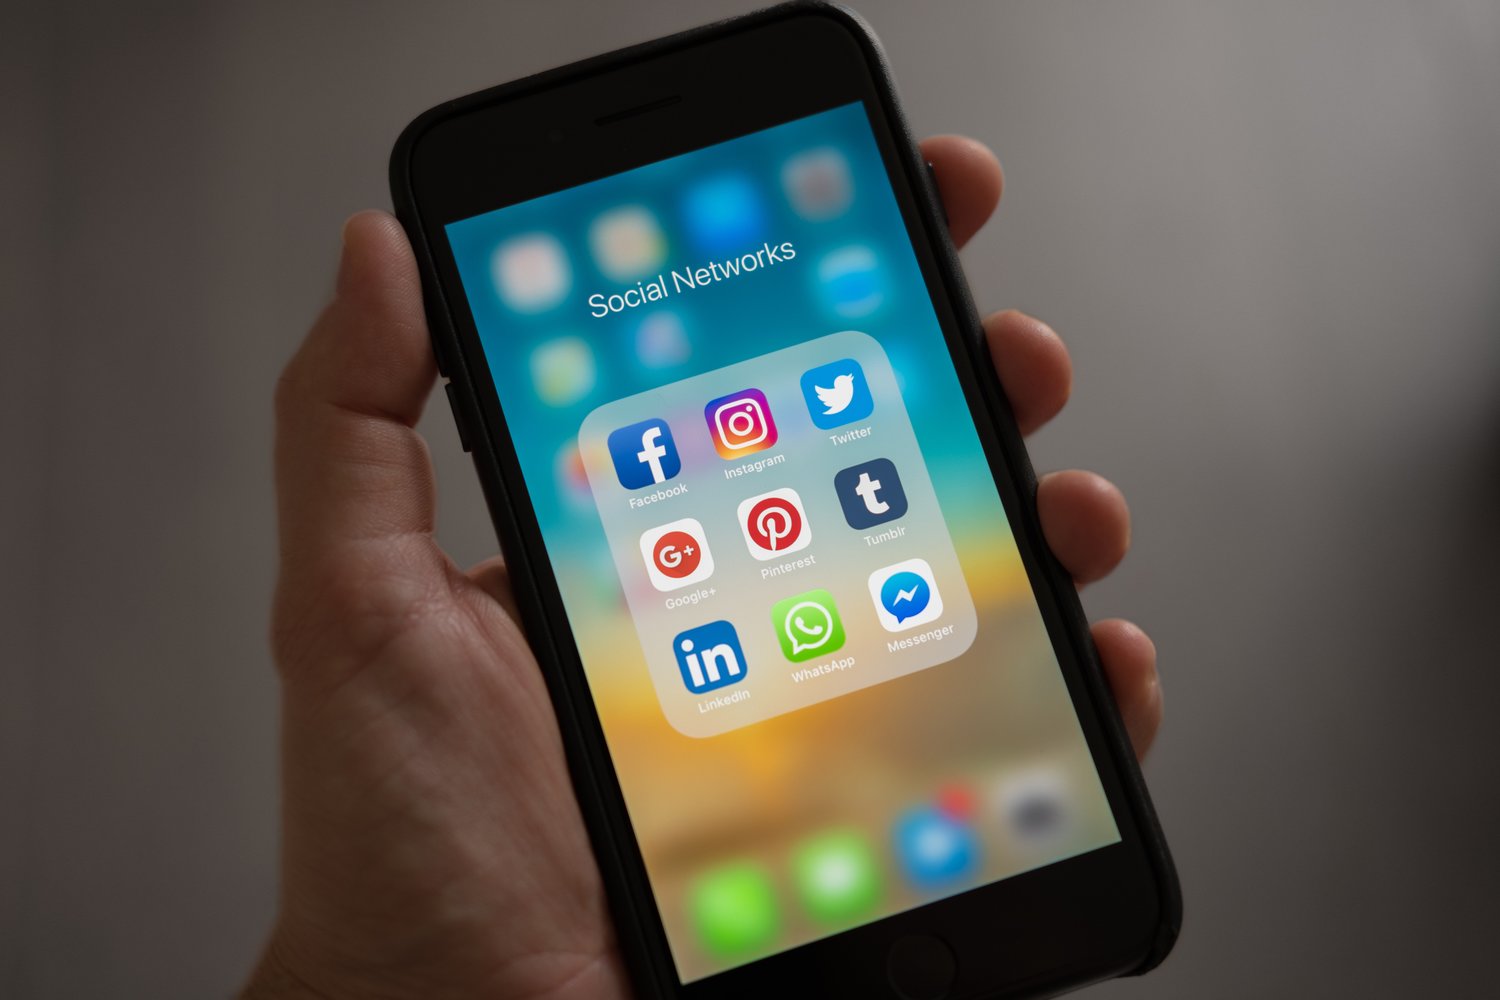 Section 230 of a key law pertaining to digital content shields social media companies from being held liable for what their users post. Both parties want to change the section of law, but experts say it will be difficult.